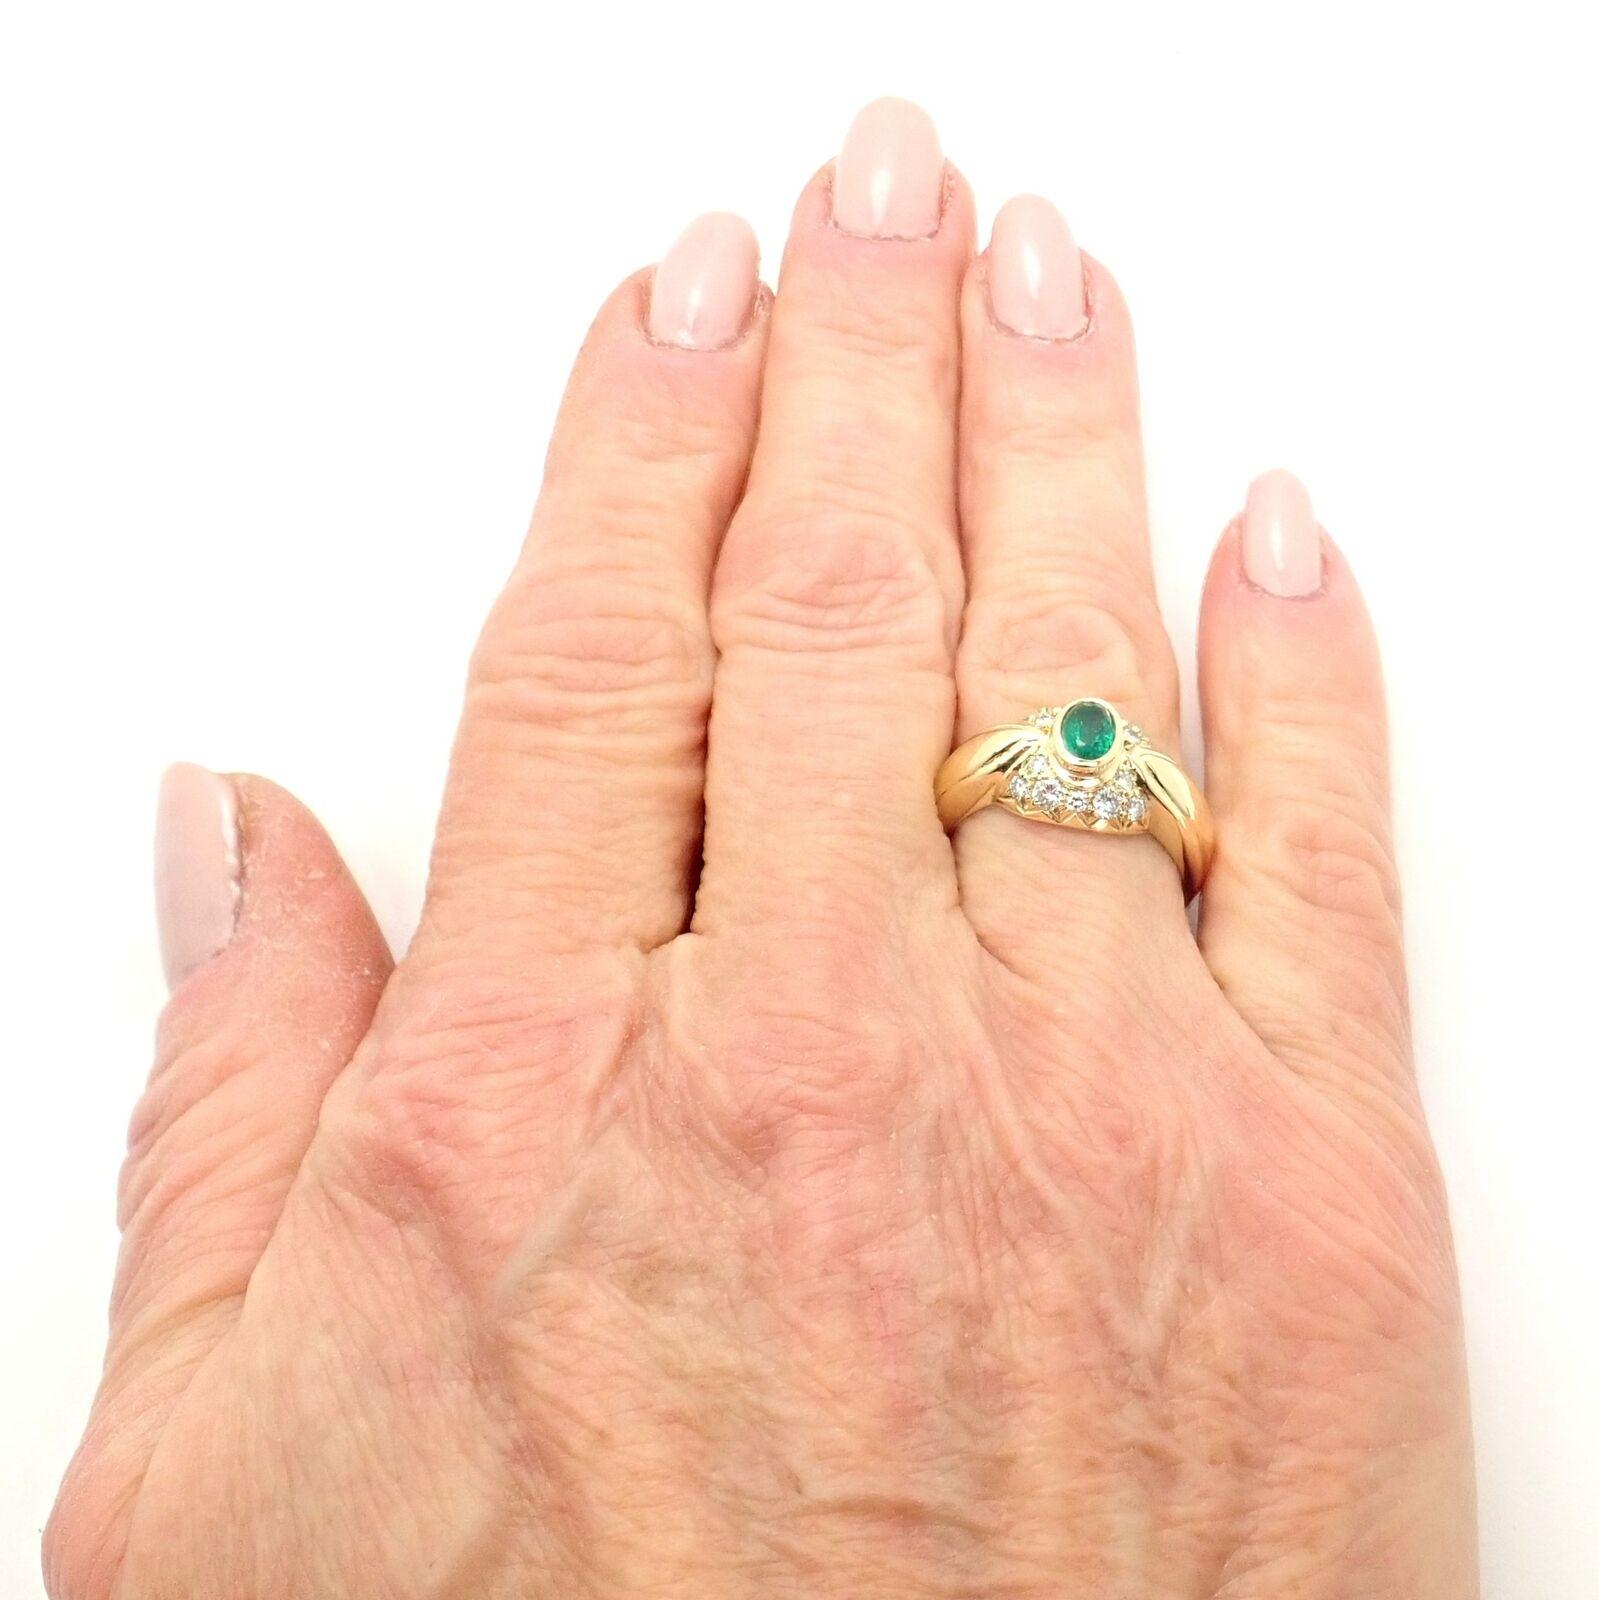 H. Stern Diamond Emerald Yellow Gold Ring In Excellent Condition For Sale In Holland, PA